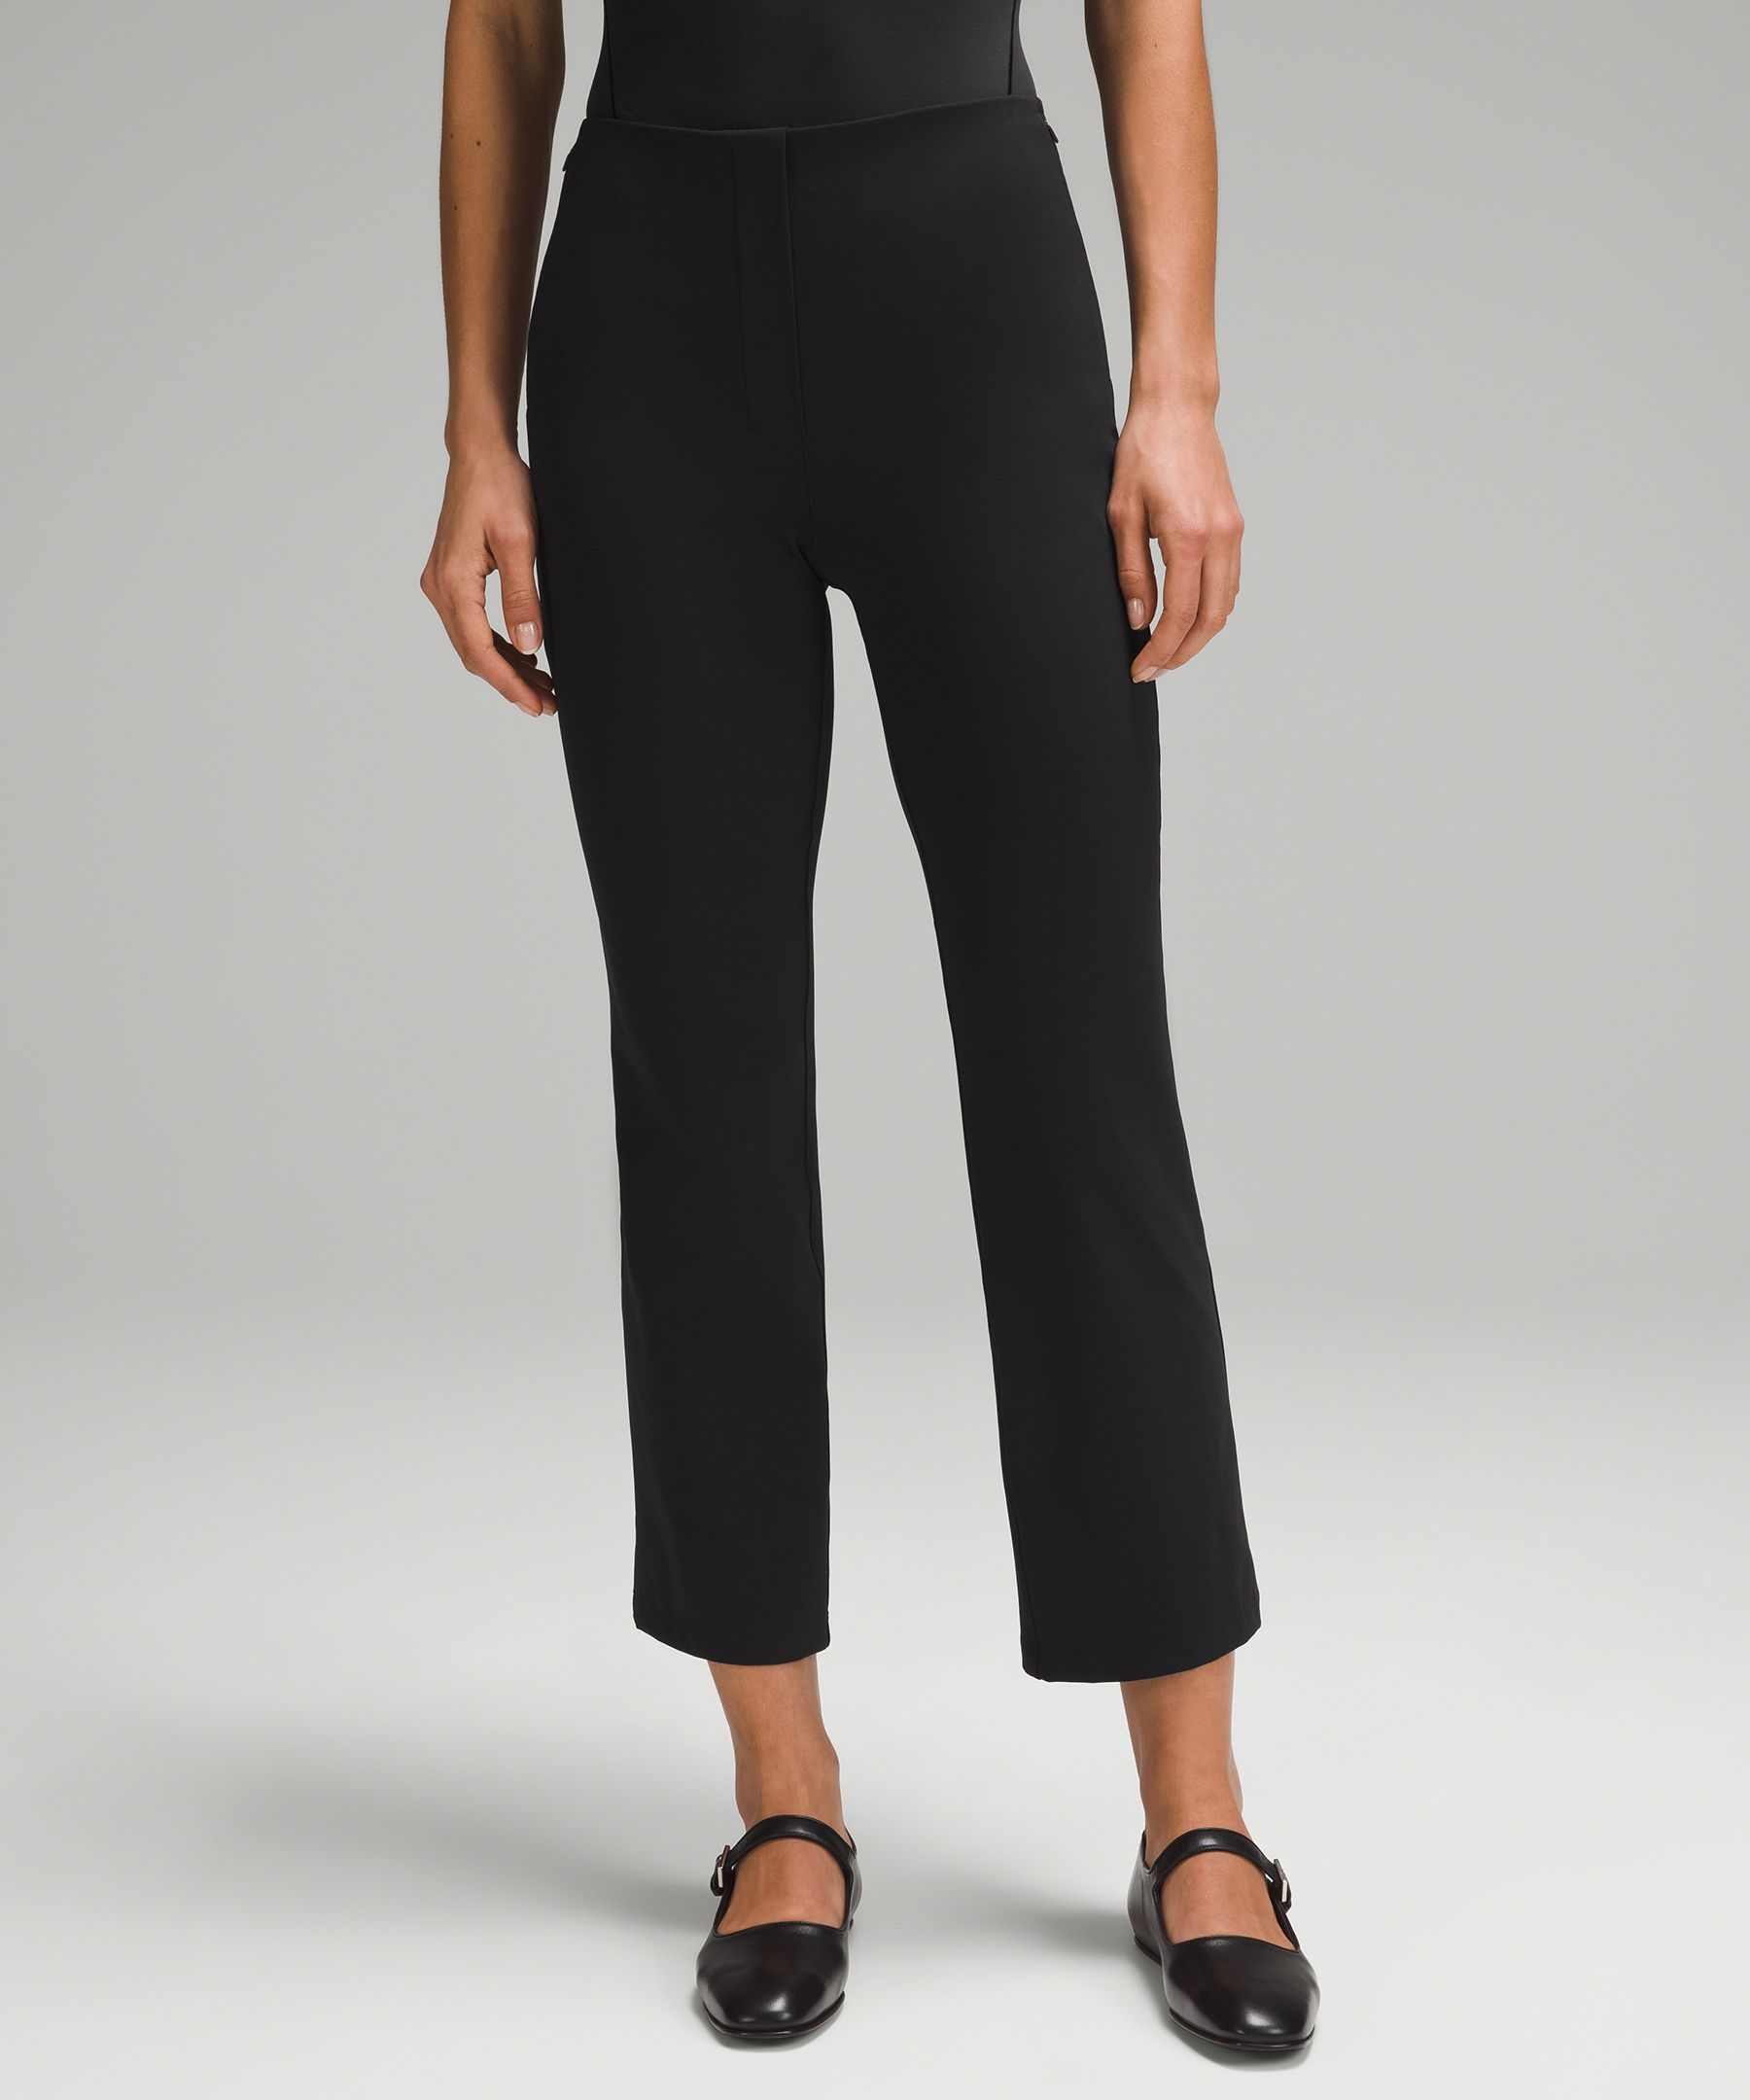 Lululemon athletica Smooth Fit Pull-On High-Rise Cropped Pant